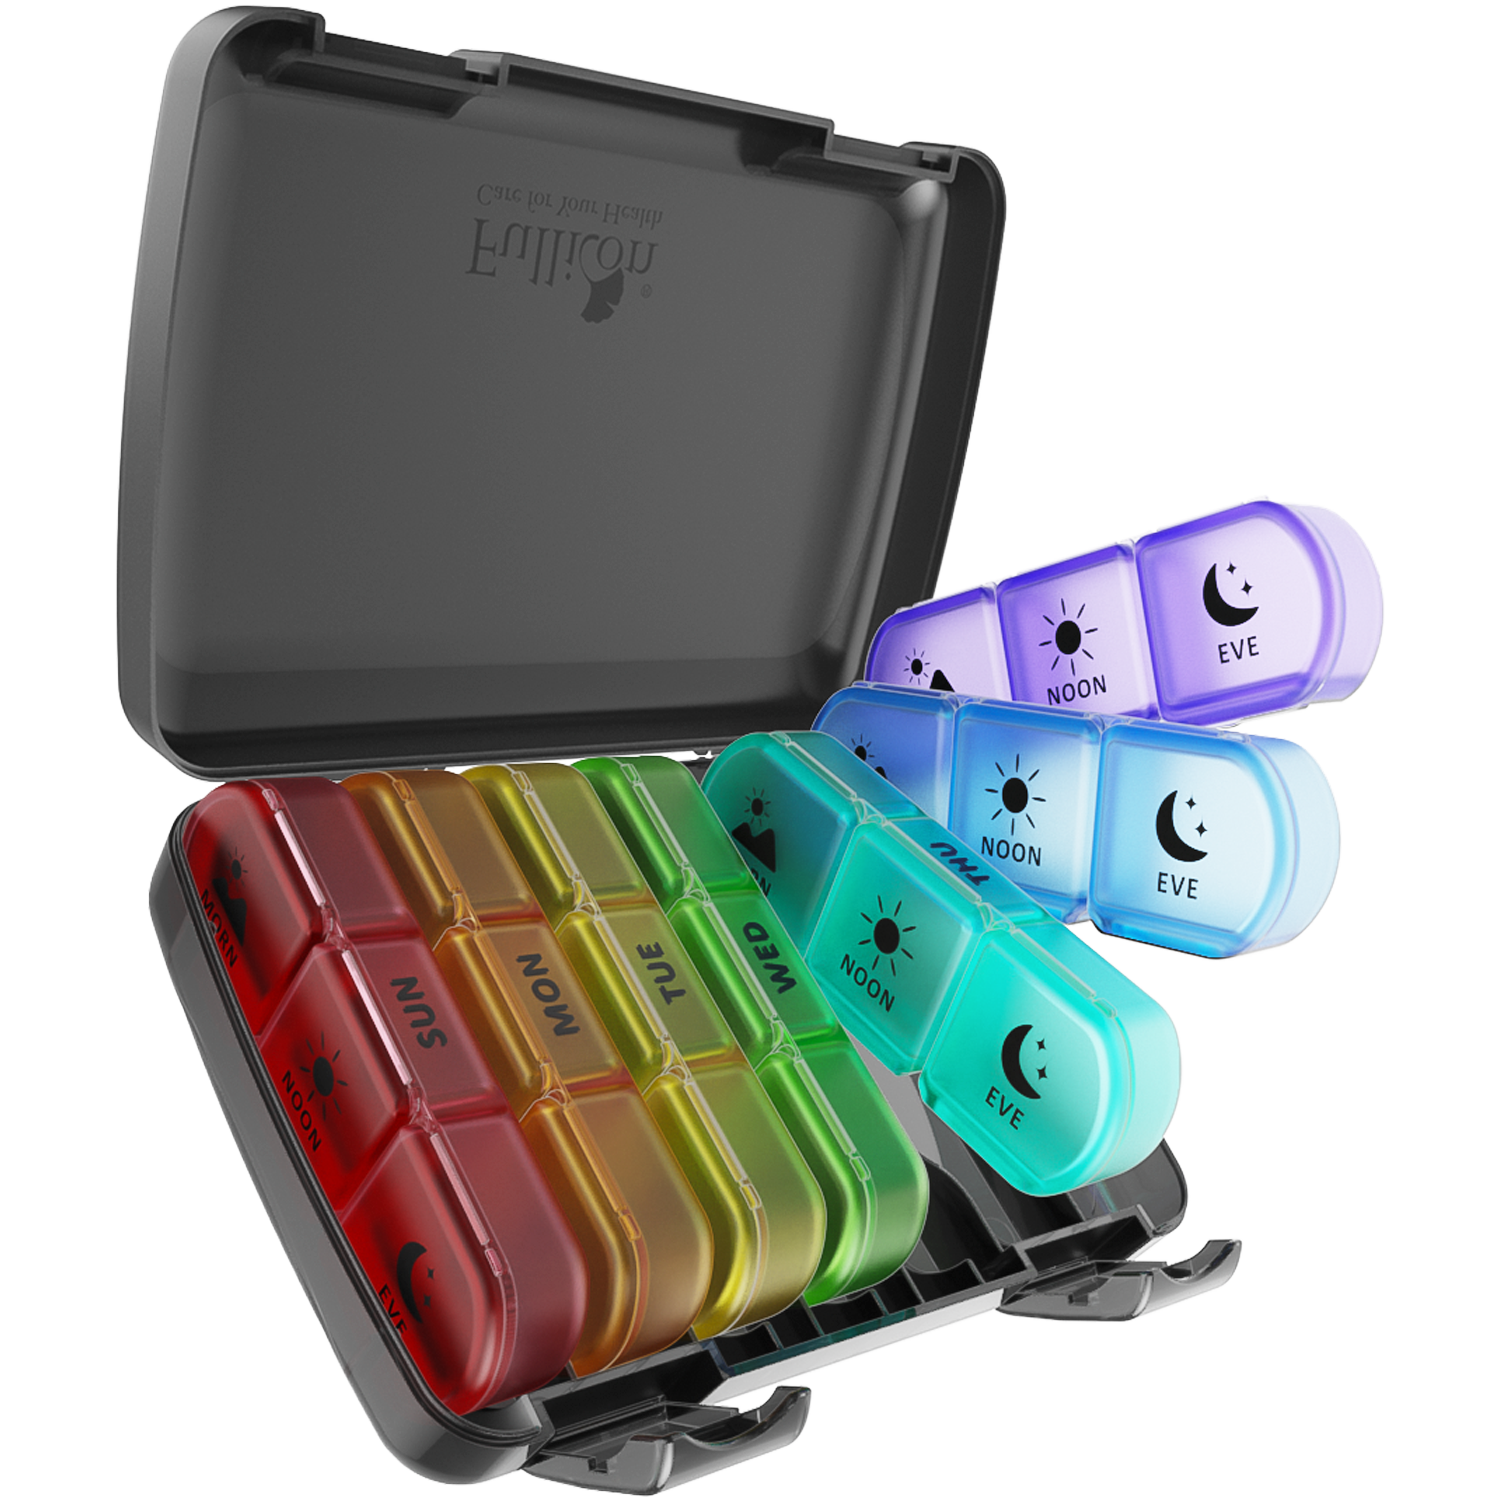 Travel Pal 3 Times a Day Extra Large Weekly Pill Case 7 Day, XL Daily Pill Box with 21 Compartments, Pill Dispenser Supplement Holder for Pills/Vitamin/Fish Oil Black Fullicon